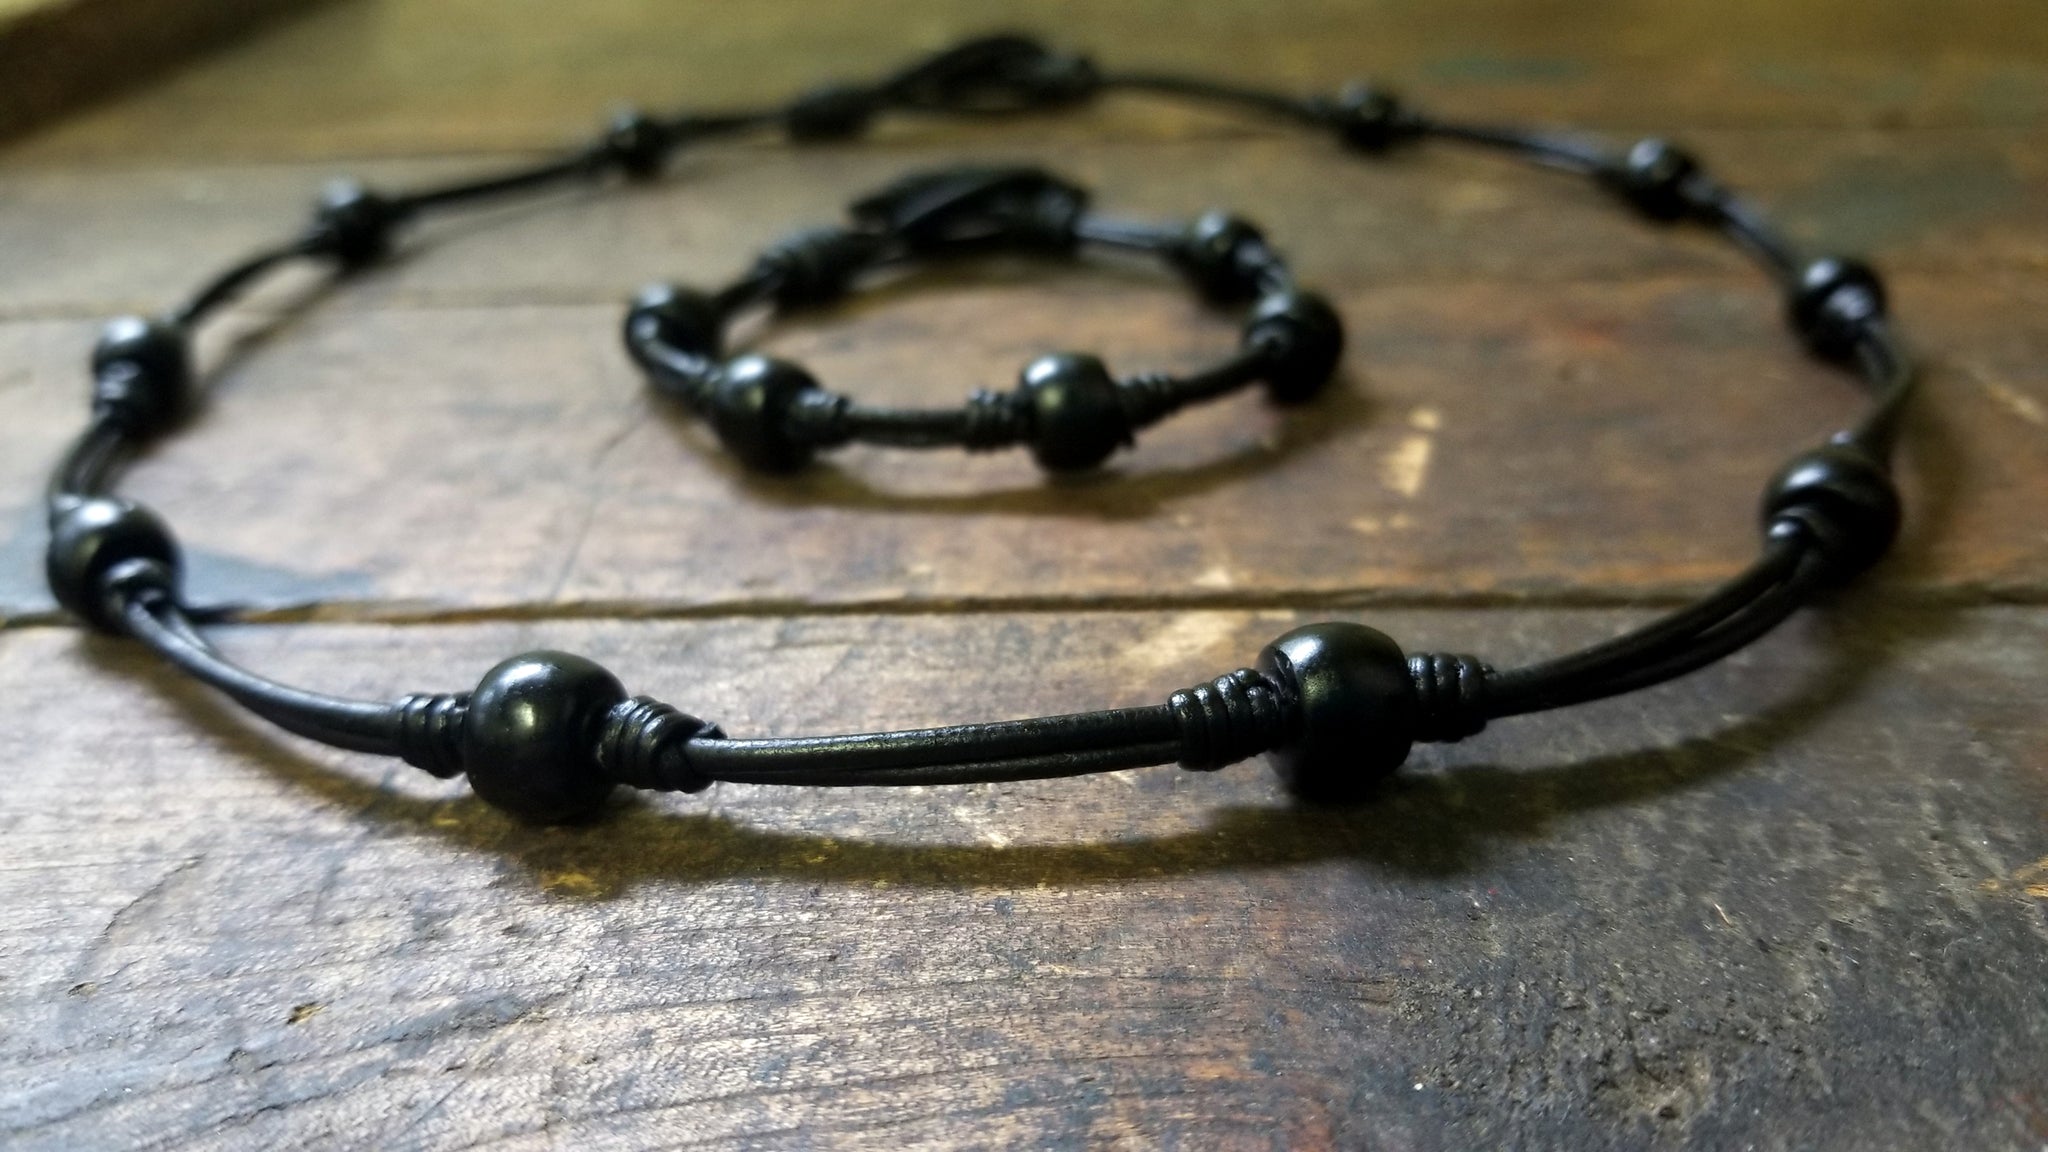 Chuma Necklace and Bracelet Set; black leather cord with black onyx African Trade Beads, Bison Leather Button and Loop Clasp